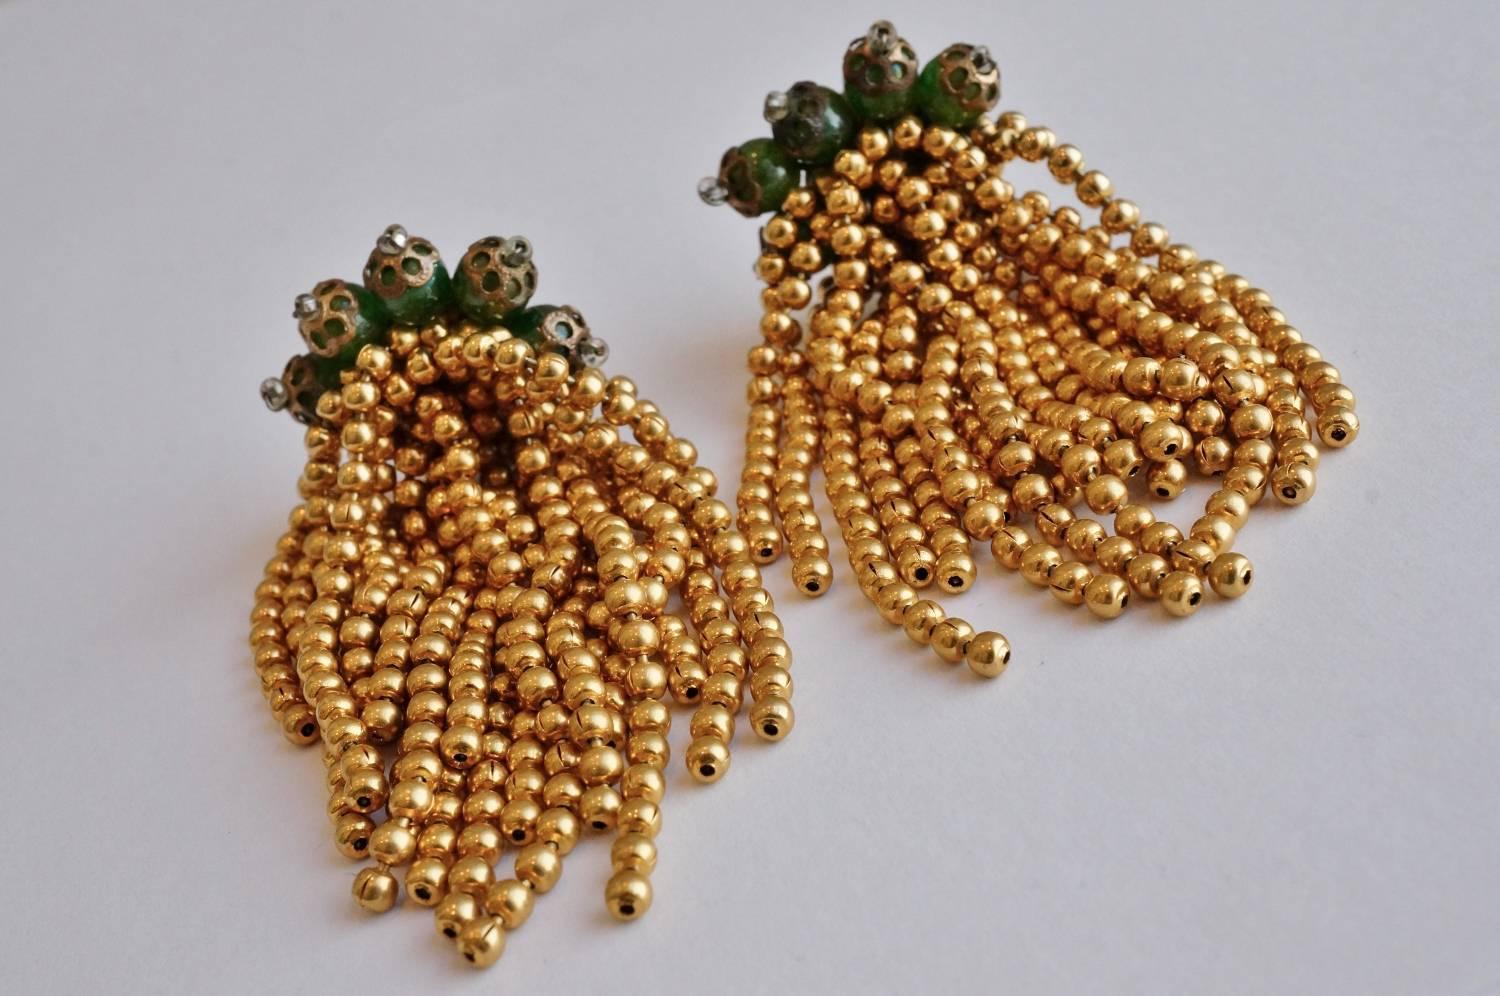 Paris House London jewelry, pair of gold plated gilt earrings, 1950s, England. Inspired by Japanese wisteria, this unique pair of vintage earrings capture the post war fascination with the exotic. From a series of 5 milky green beads dangle a